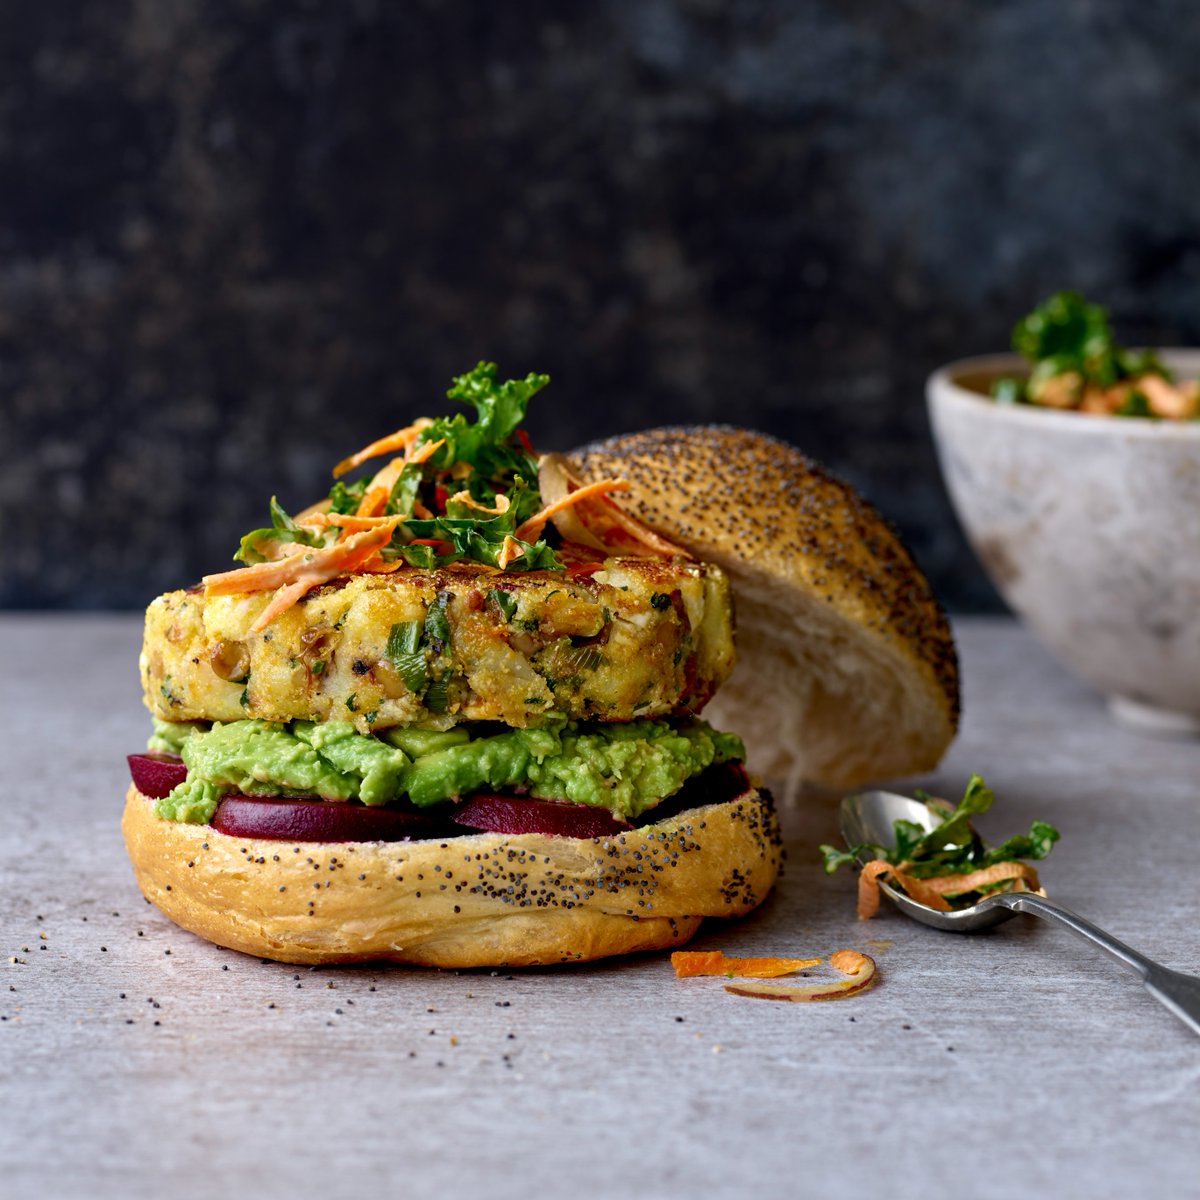 It’s #NationalBBQWeek and the sunshine is here! Fire up the barbeque this weekend and try out these #JerseyRoyal, lentil and feta burgers. A delicious veggie addition to any al fresco occasion! #seasonalproduce #vegetarian #bbq #springtime